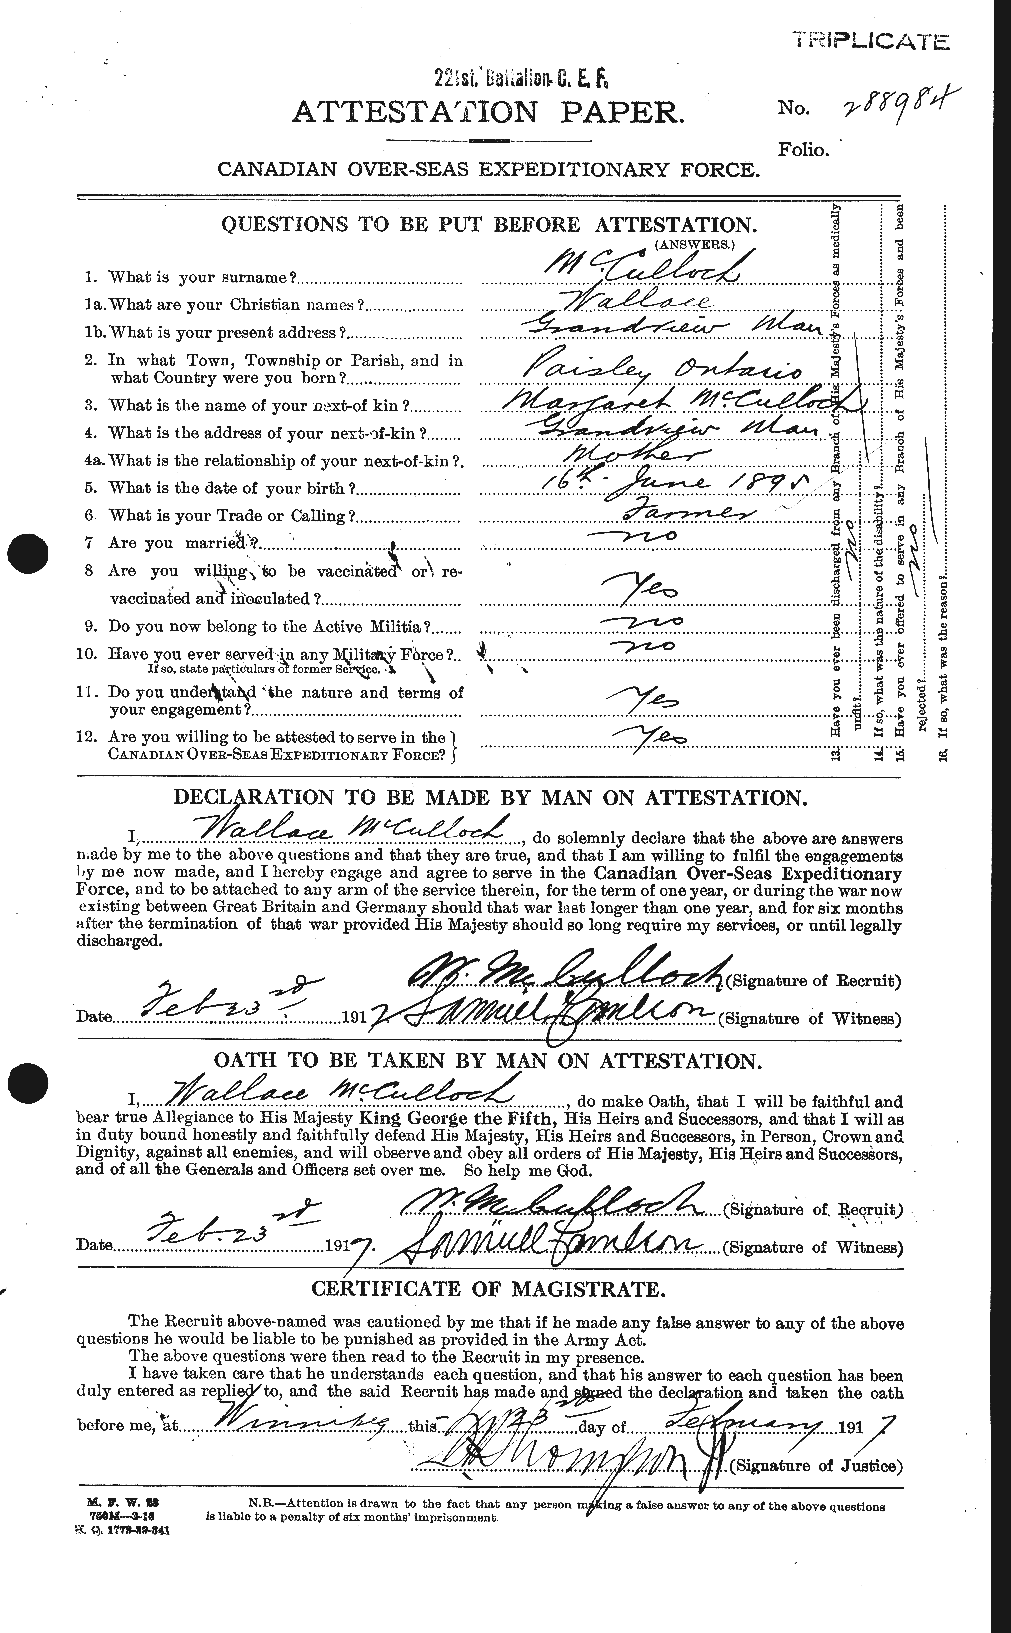 Personnel Records of the First World War - CEF 135164a